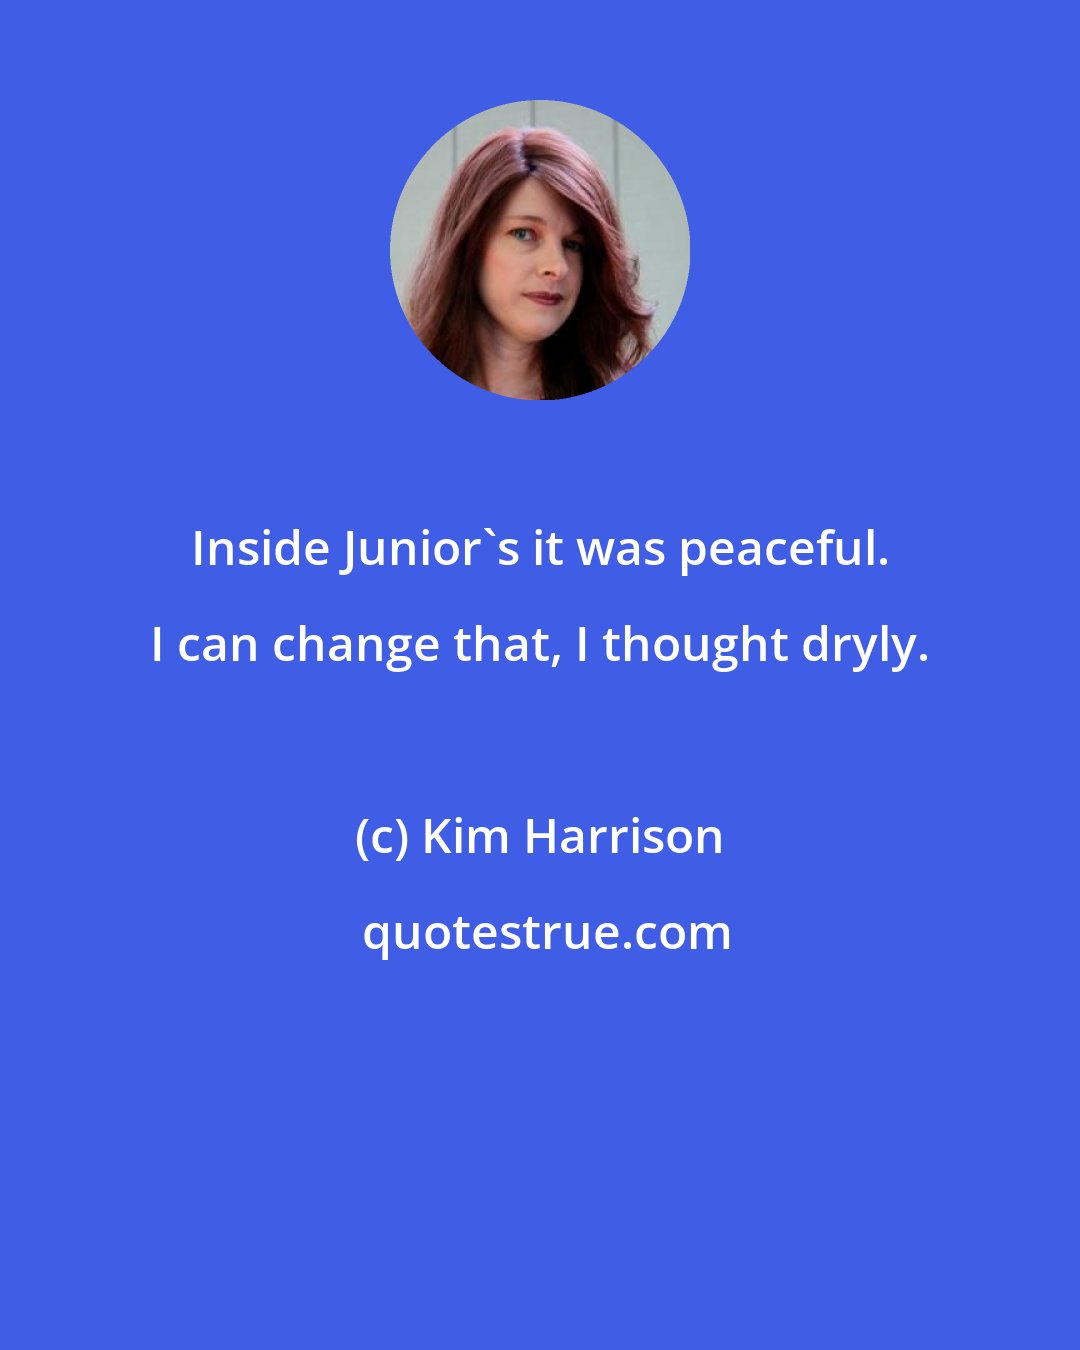 Kim Harrison: Inside Junior's it was peaceful. I can change that, I thought dryly.